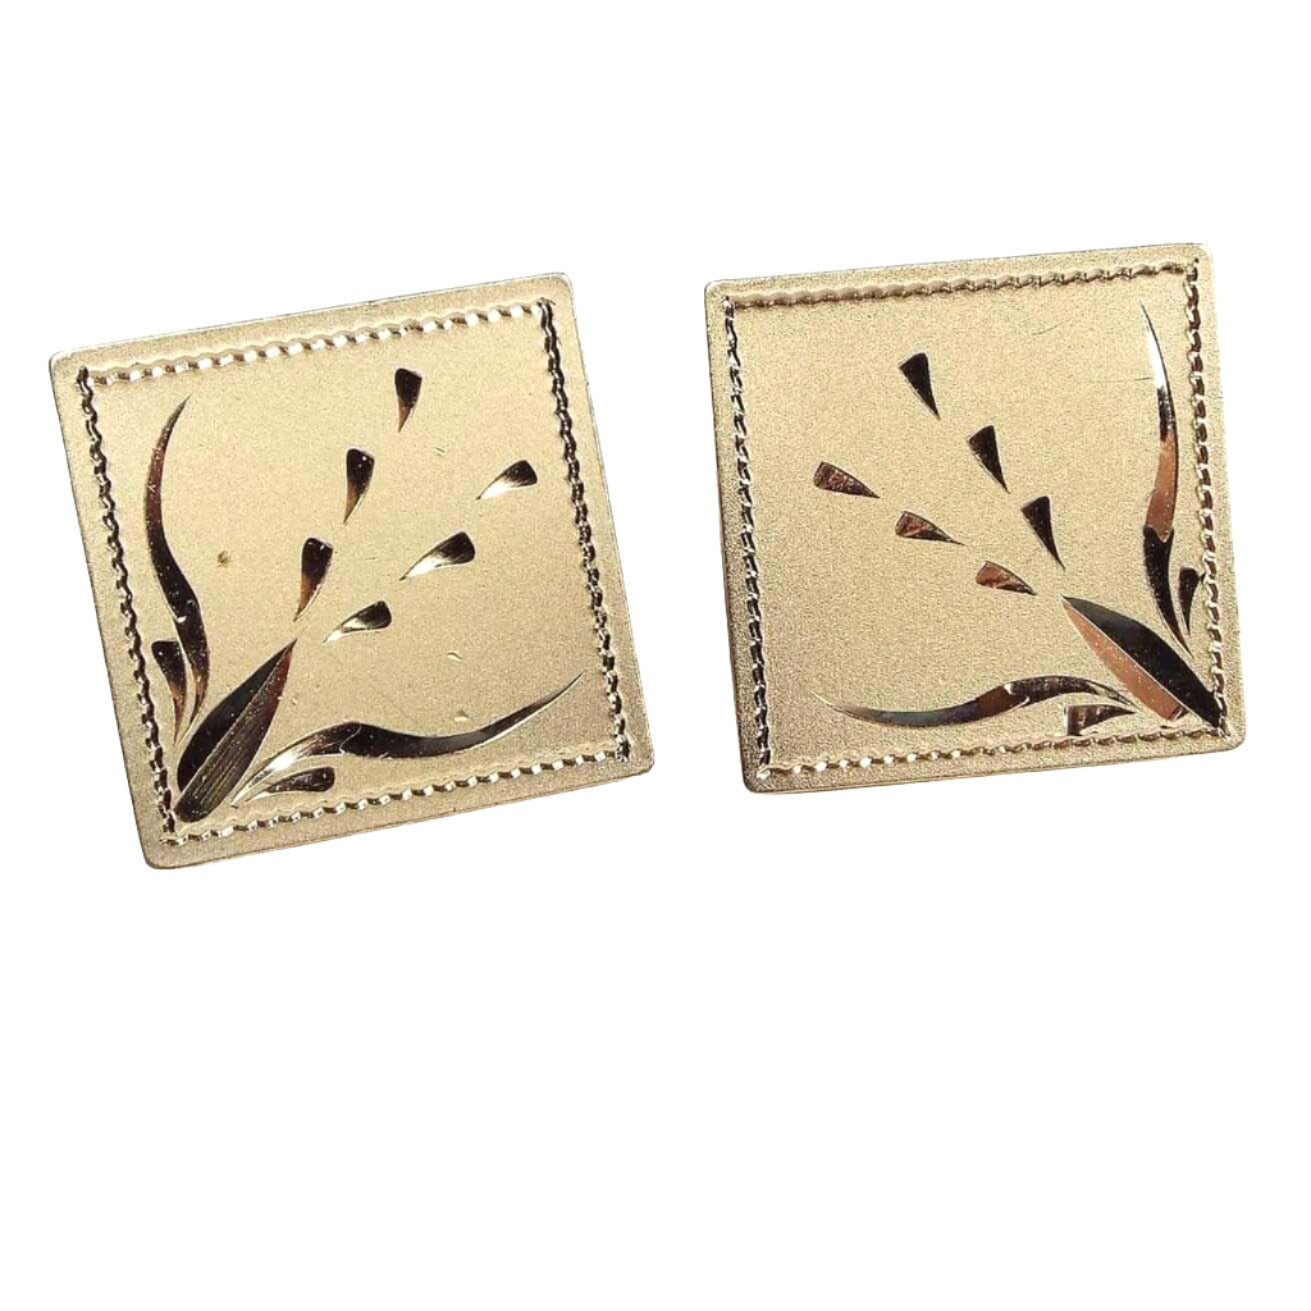 Front view of the Mid Century vintage Anson cufflinks with diamond cut etched design. The are matte gold tone in color and square in shape. There is a cut leaf style design going diagonally inward. 